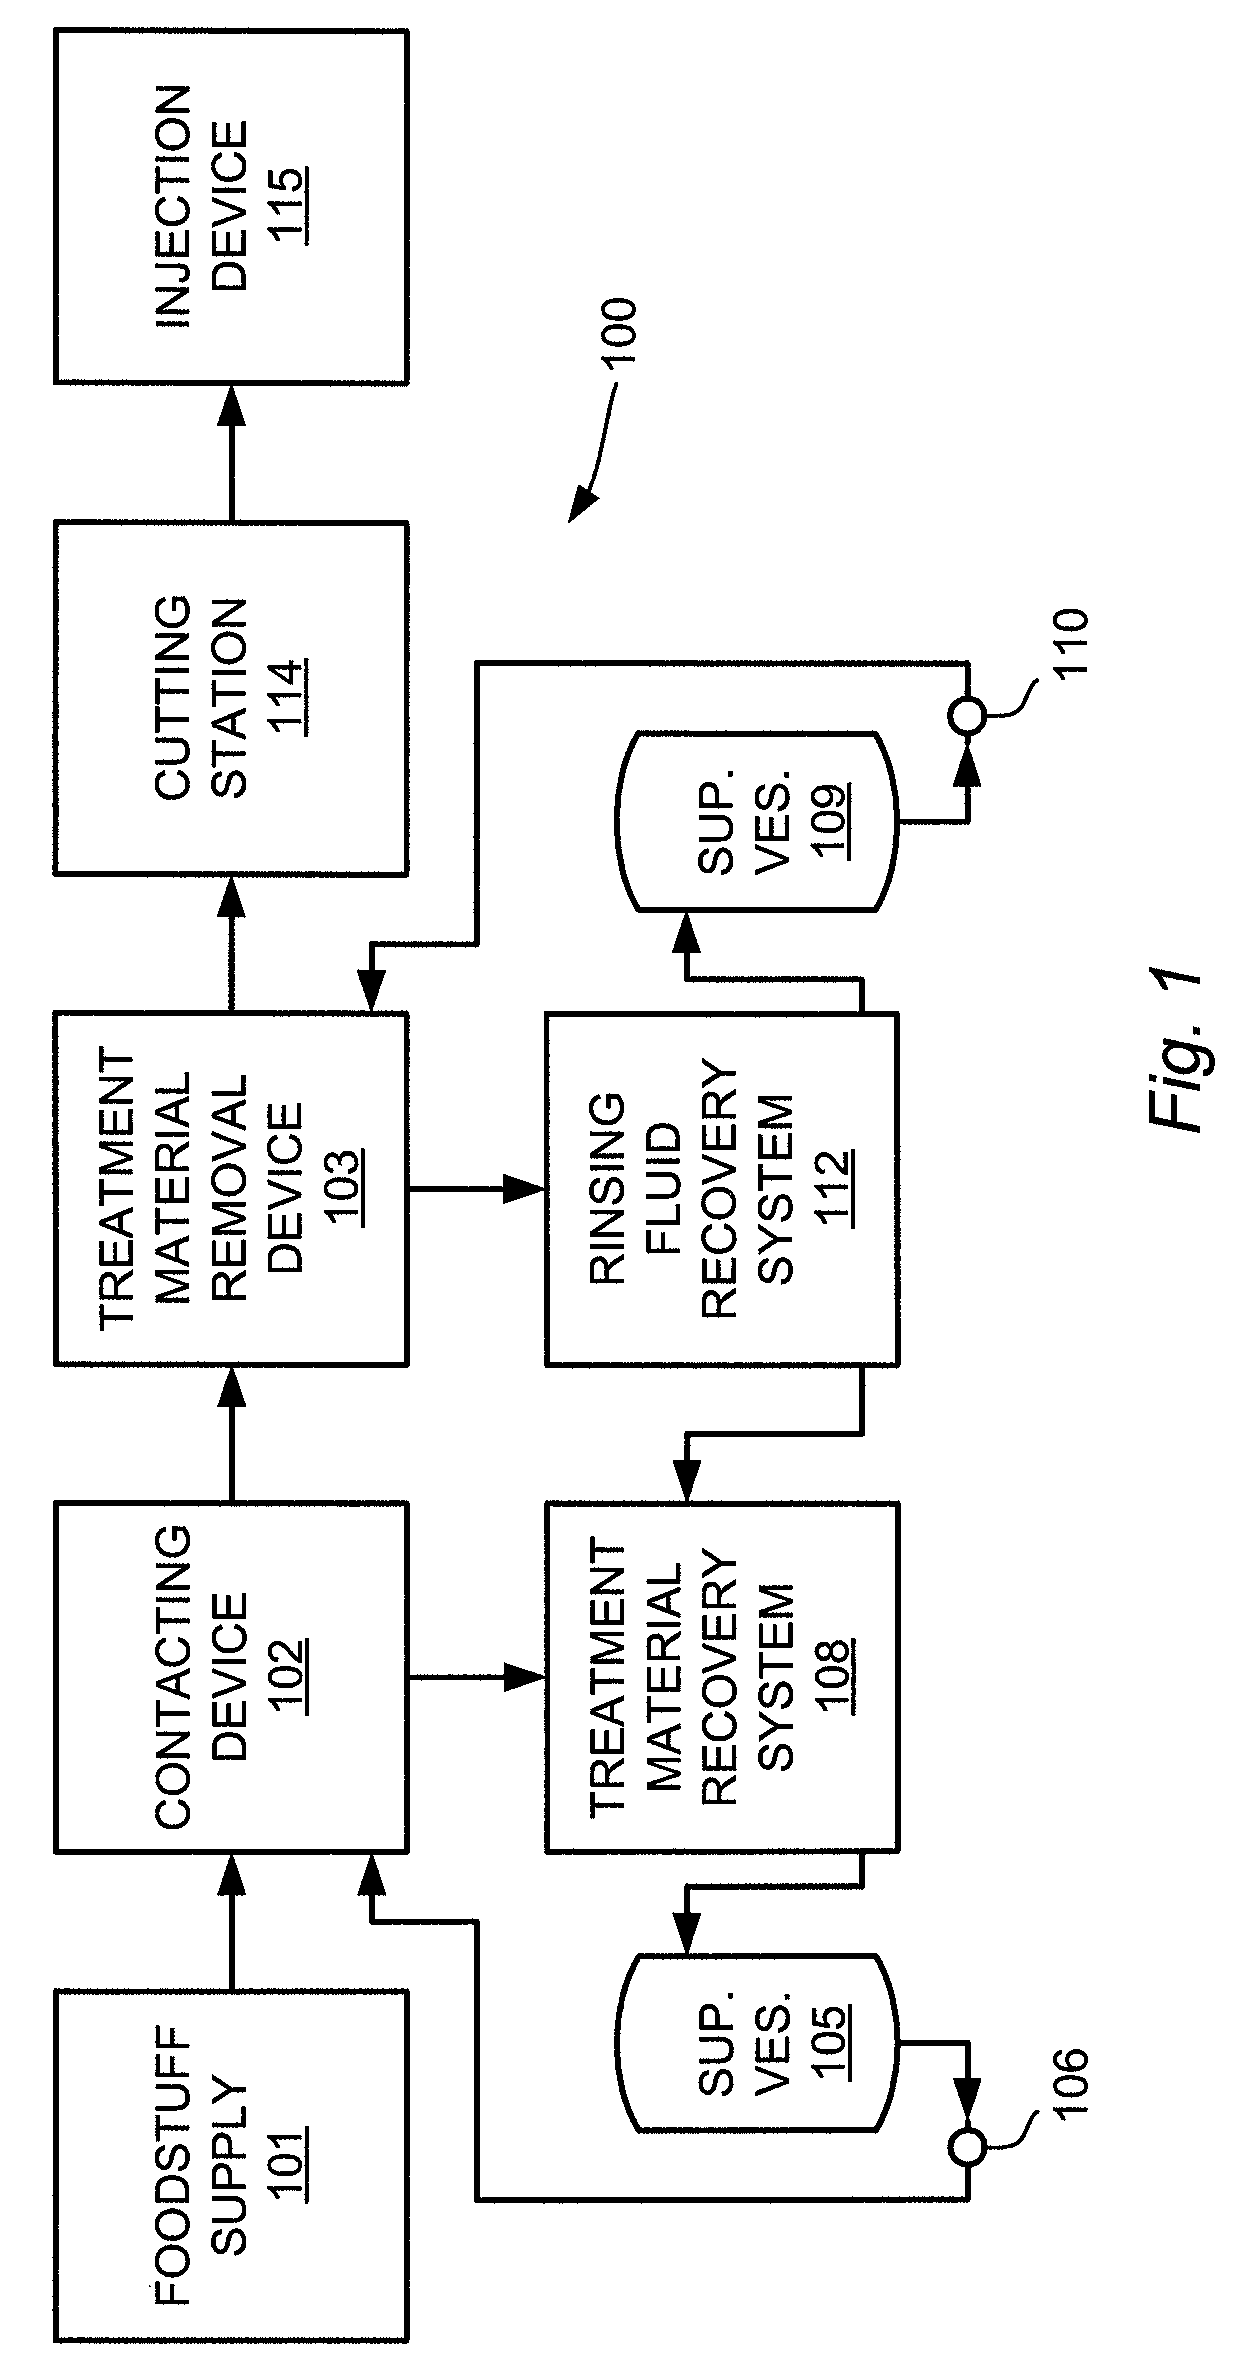 Method for applying treatment materials to foodstuffs